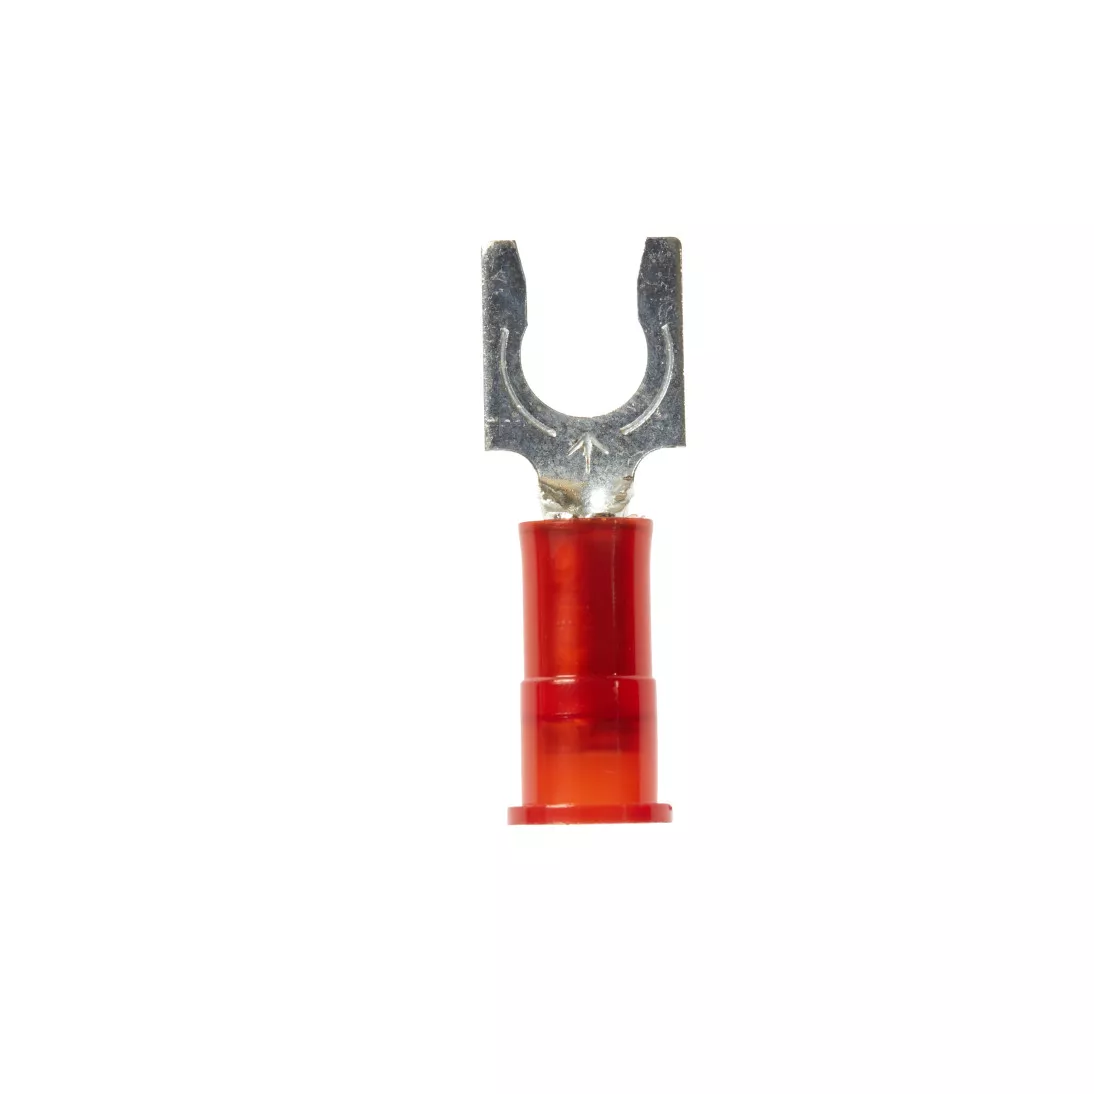 3M™ Scotchlok™ Locking Fork Nylon Insulated, 100/bottle, MNG18-10FLX,
spring-like tongue firmly fits around the stud, 500/Case